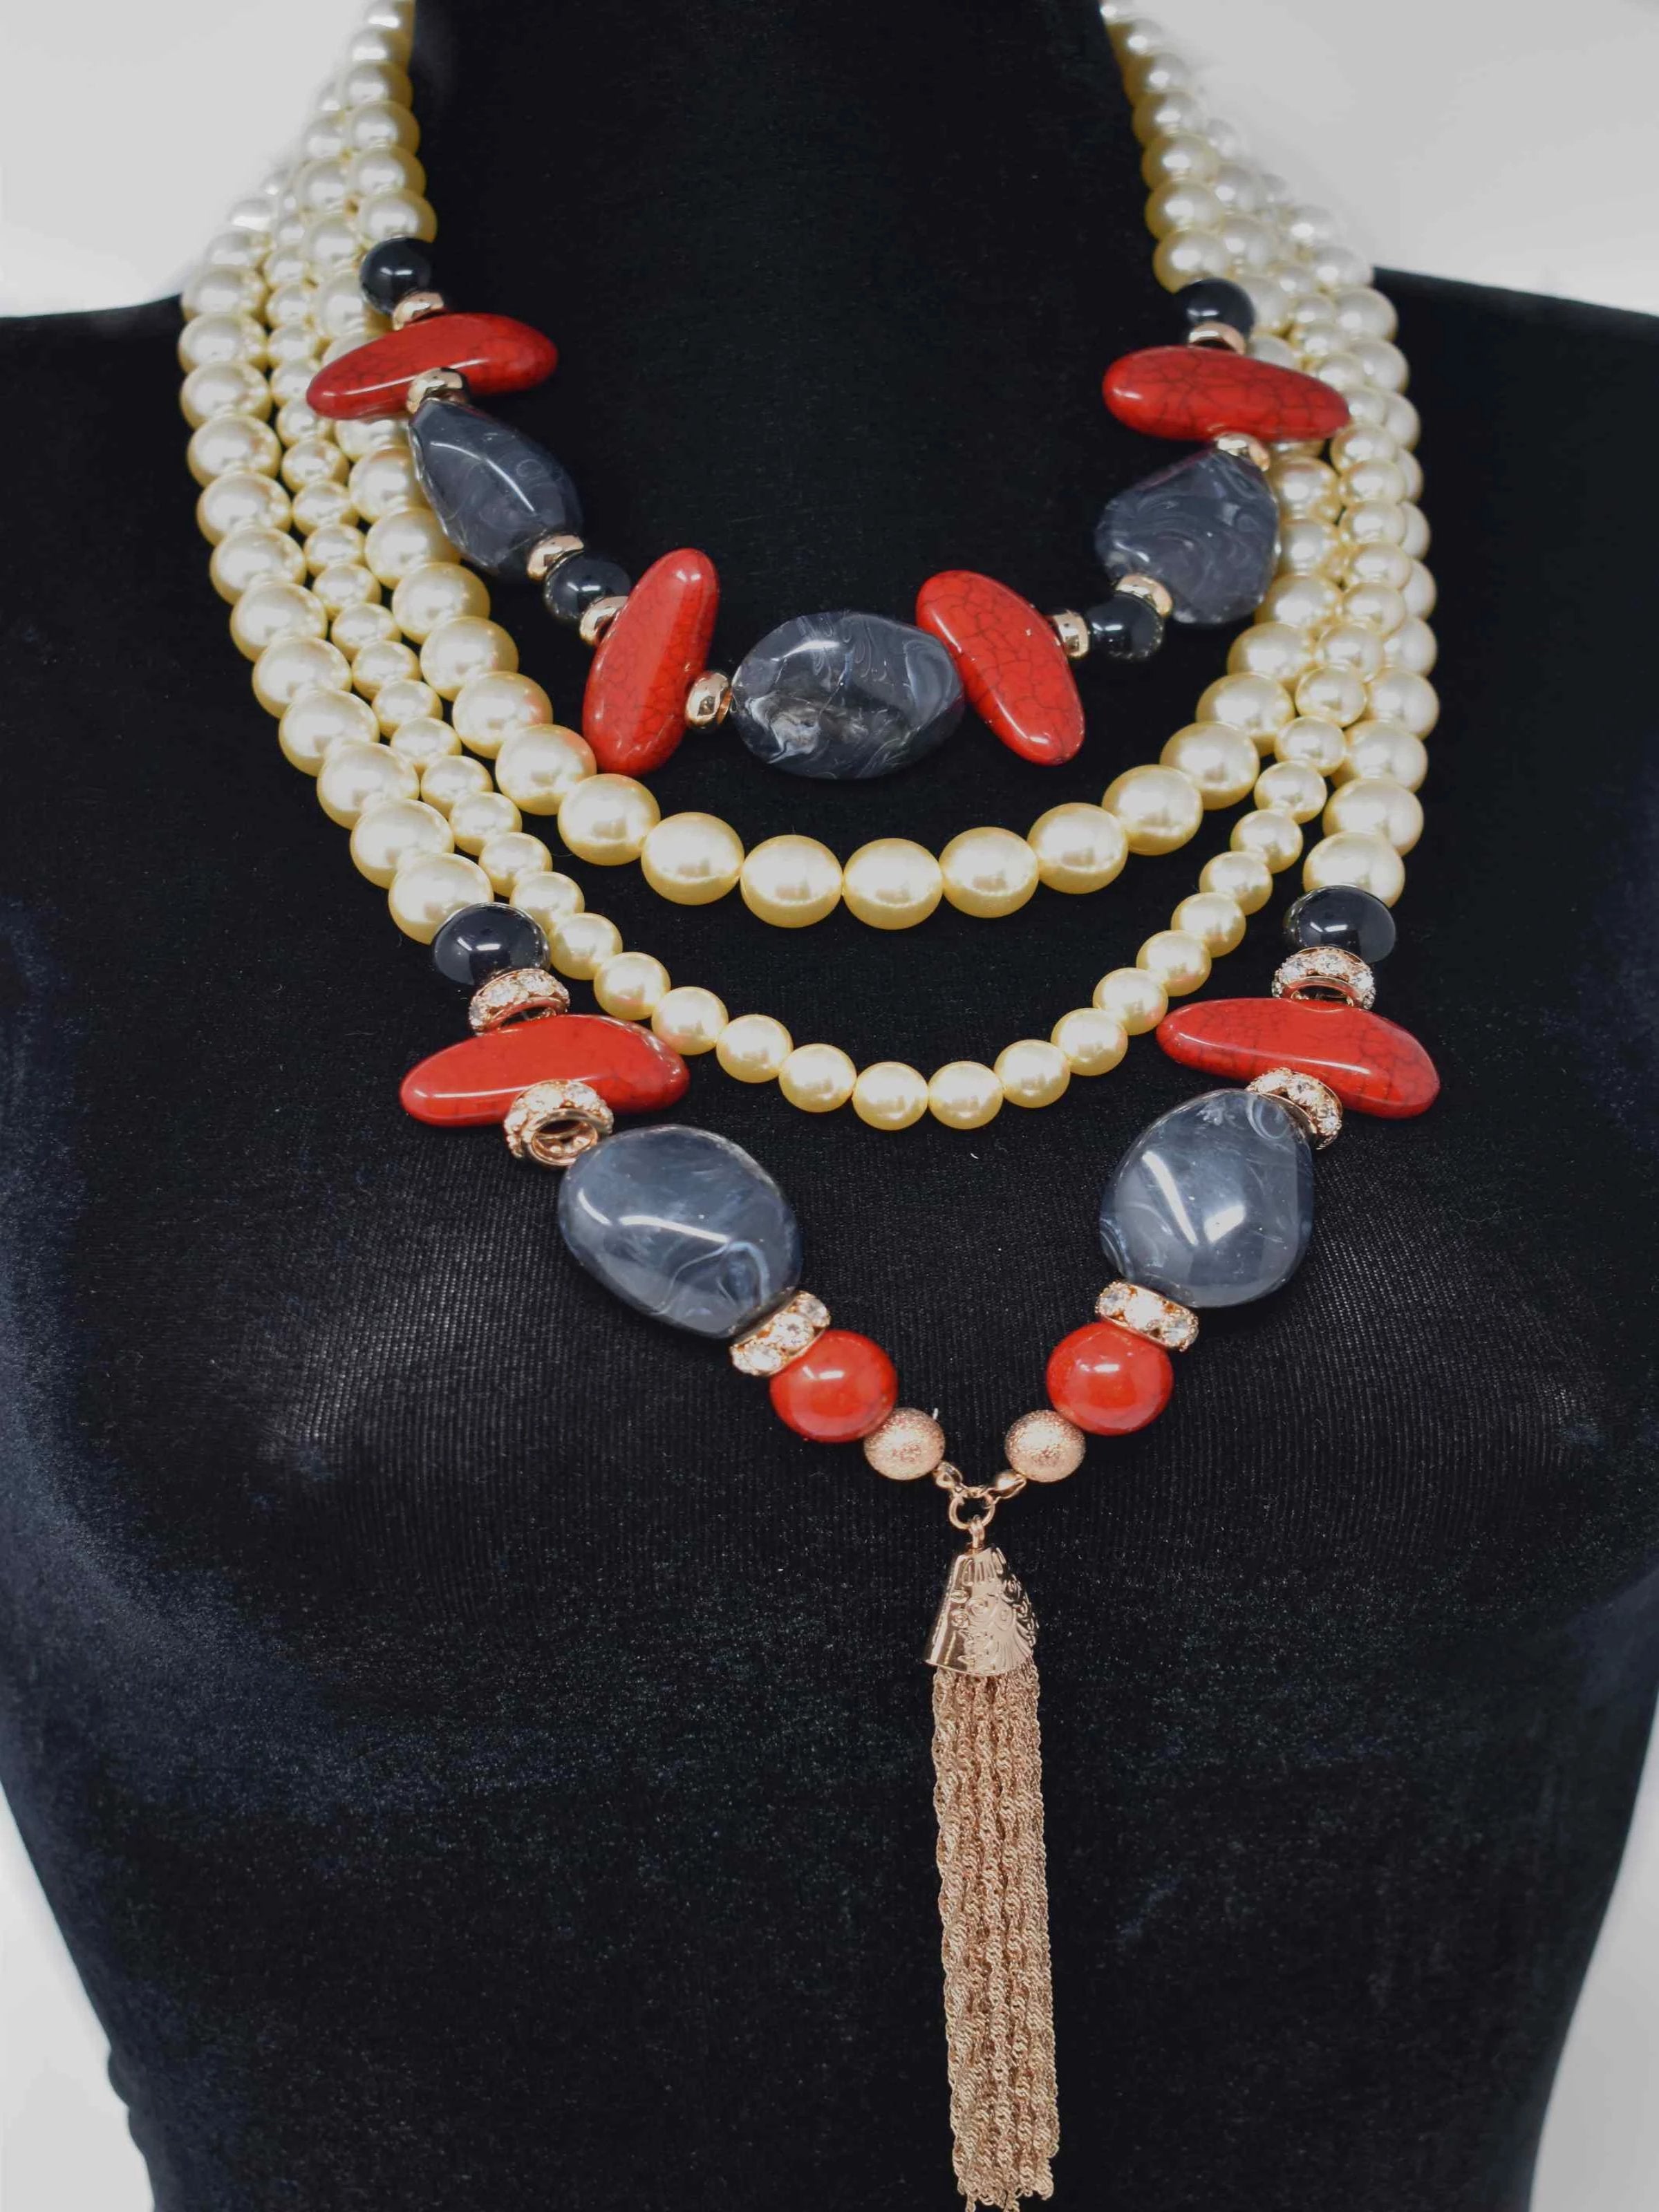 Milla adds a modern twist to a classic set of pearls. This is our long statement pearl layered necklace accented with red and black stones and a gold fringe tassel. It measures around 20" in length and closes with a lobster clasp.